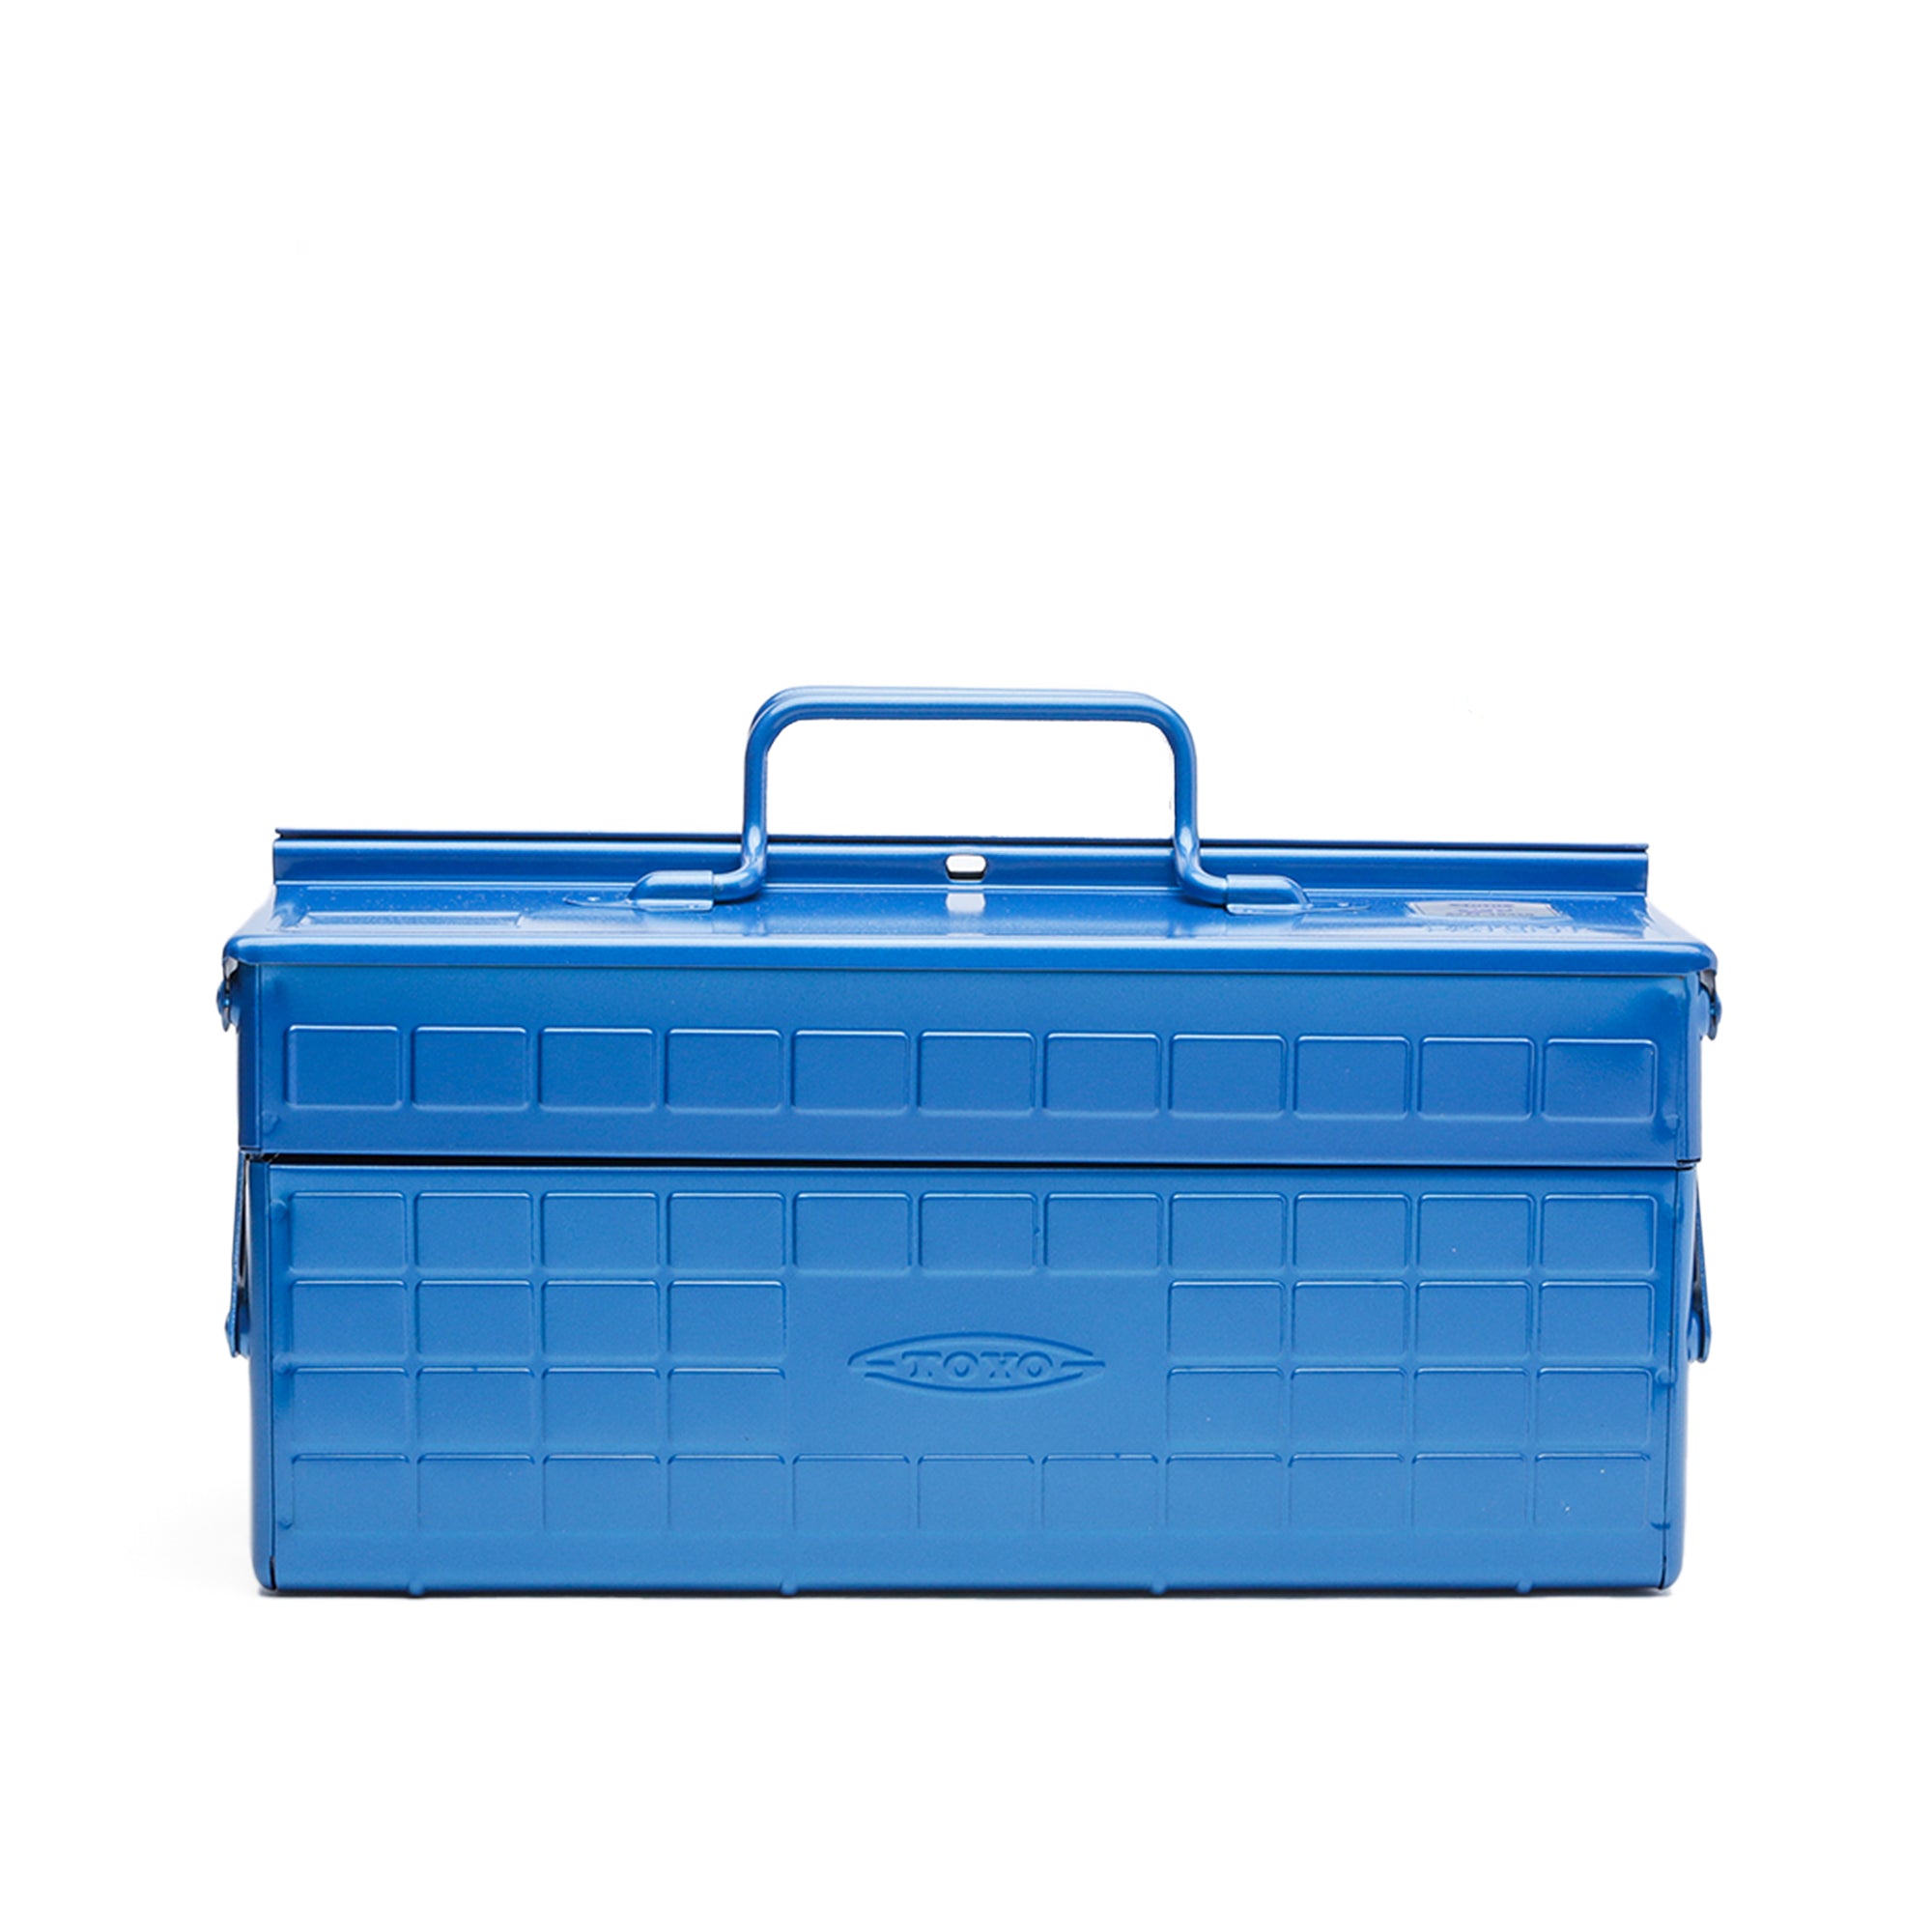 – + Toolboxes Little King Storage